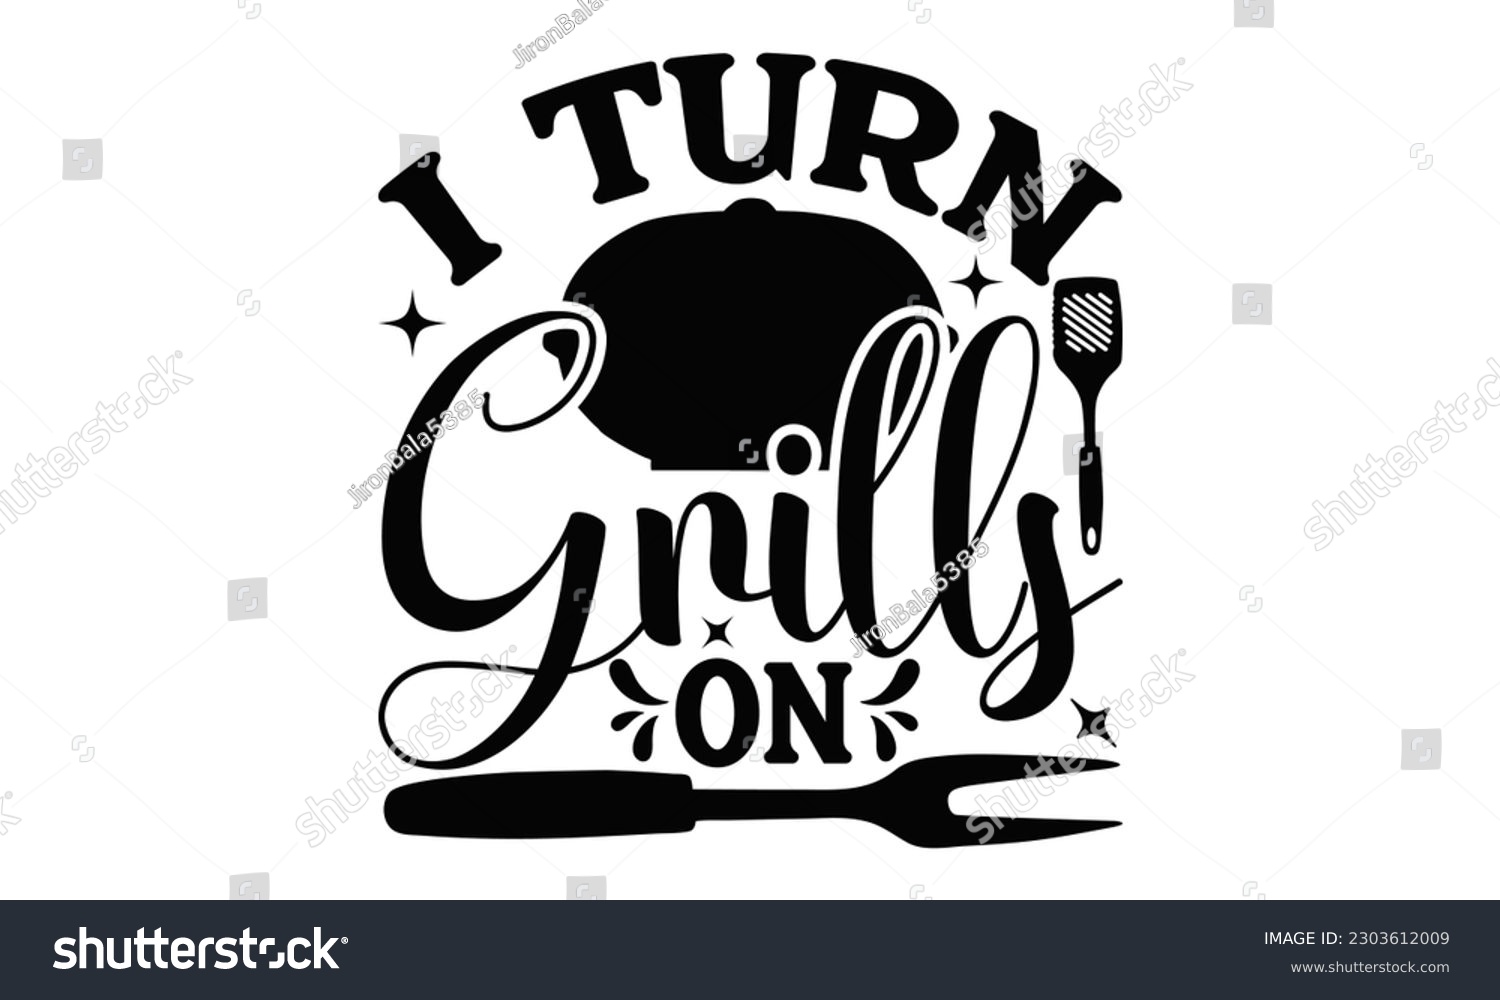 SVG of I Turn Grills On - Barbecue  SVG Design, Isolated on white background, Illustration for prints on t-shirts, bags, posters, cards and Mug.
 svg